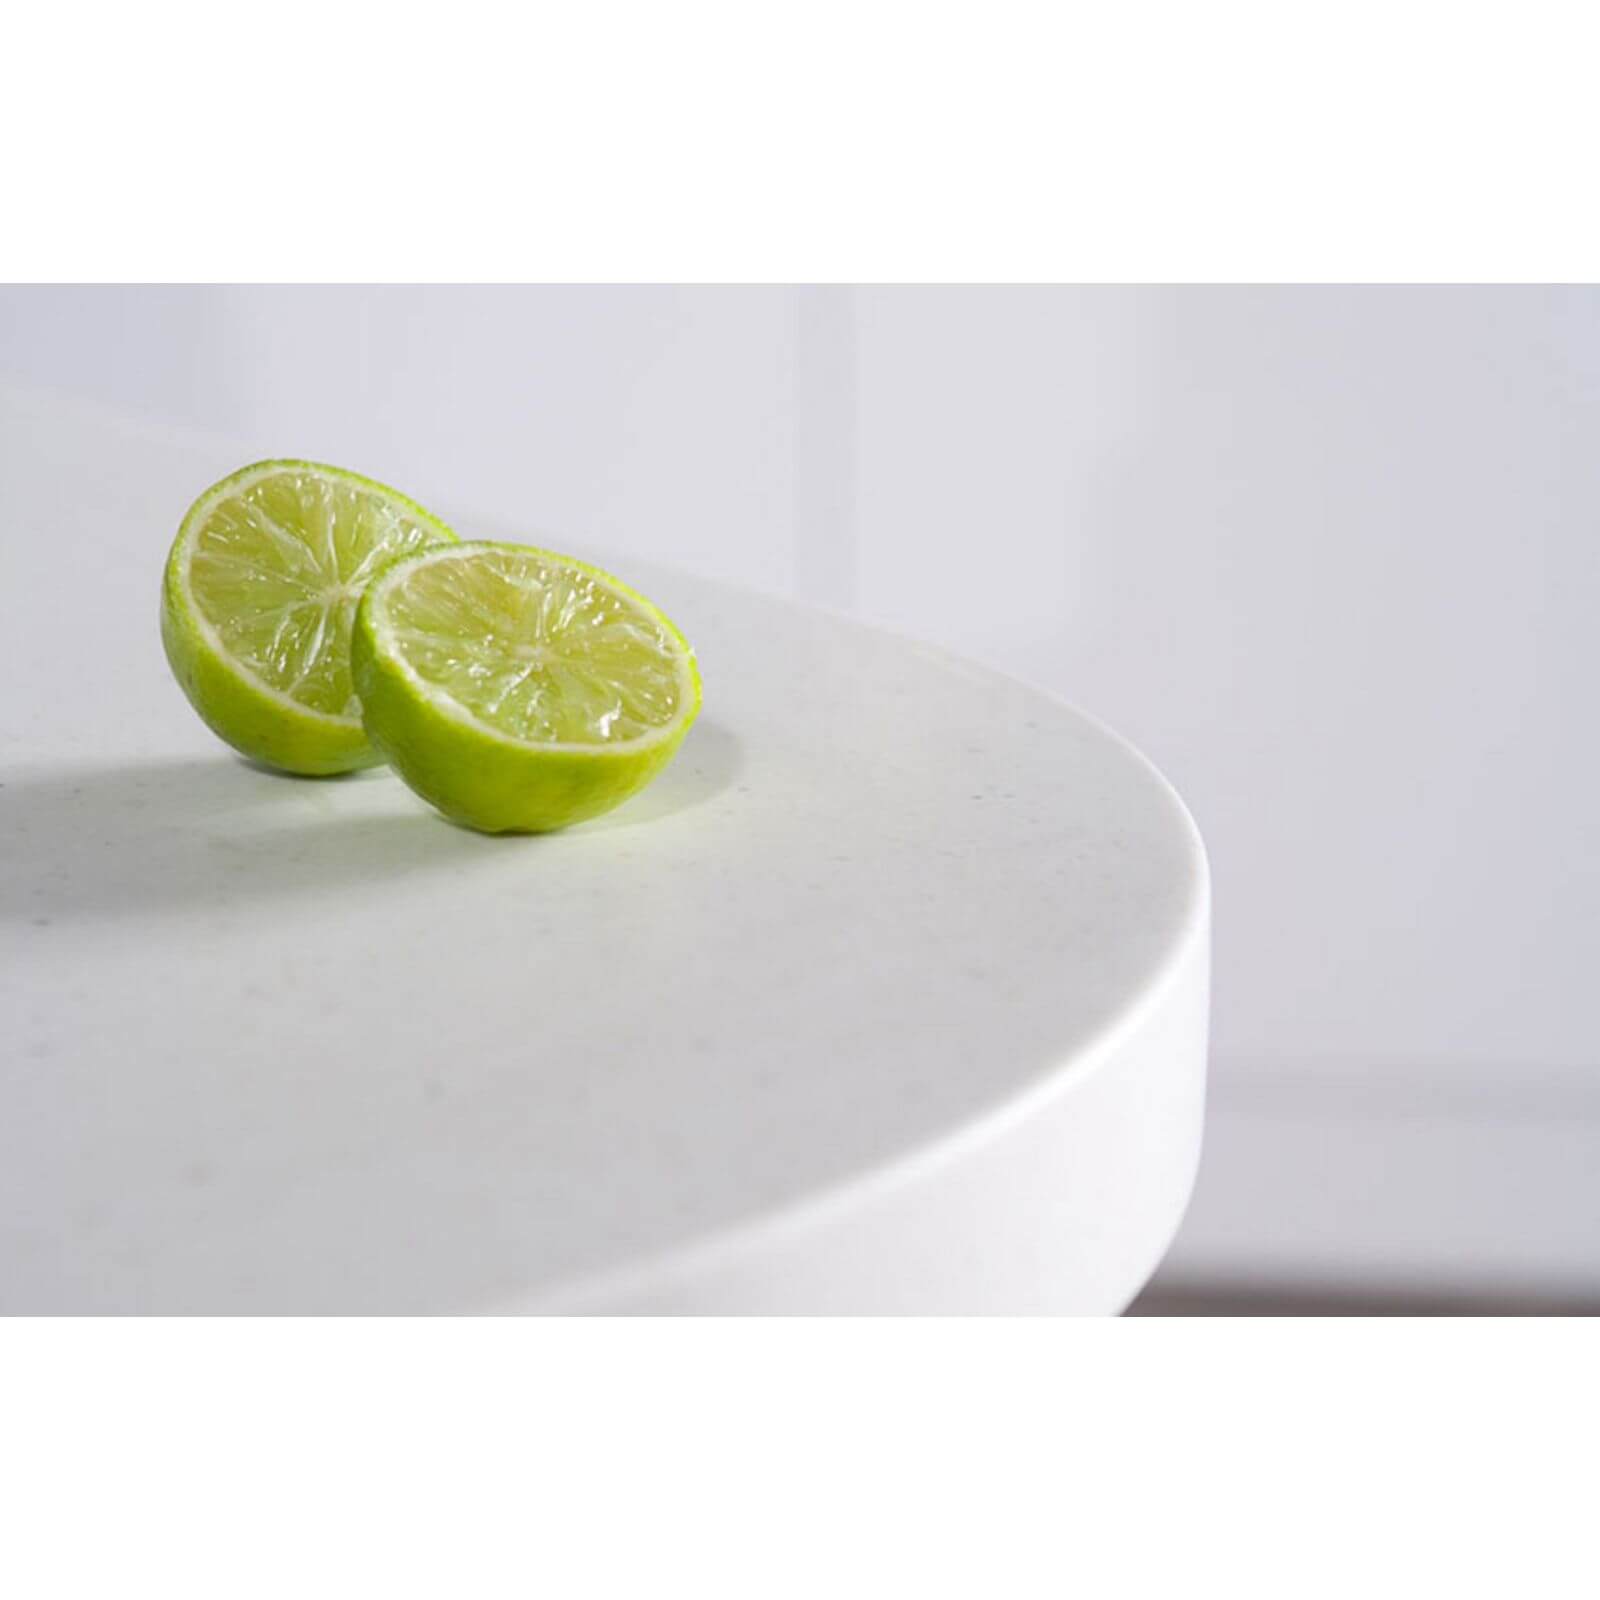 Maia Calcite Kitchen Sink Worktop - Acrylic Right Hand Bowl - 3600 x 650 x 28mm